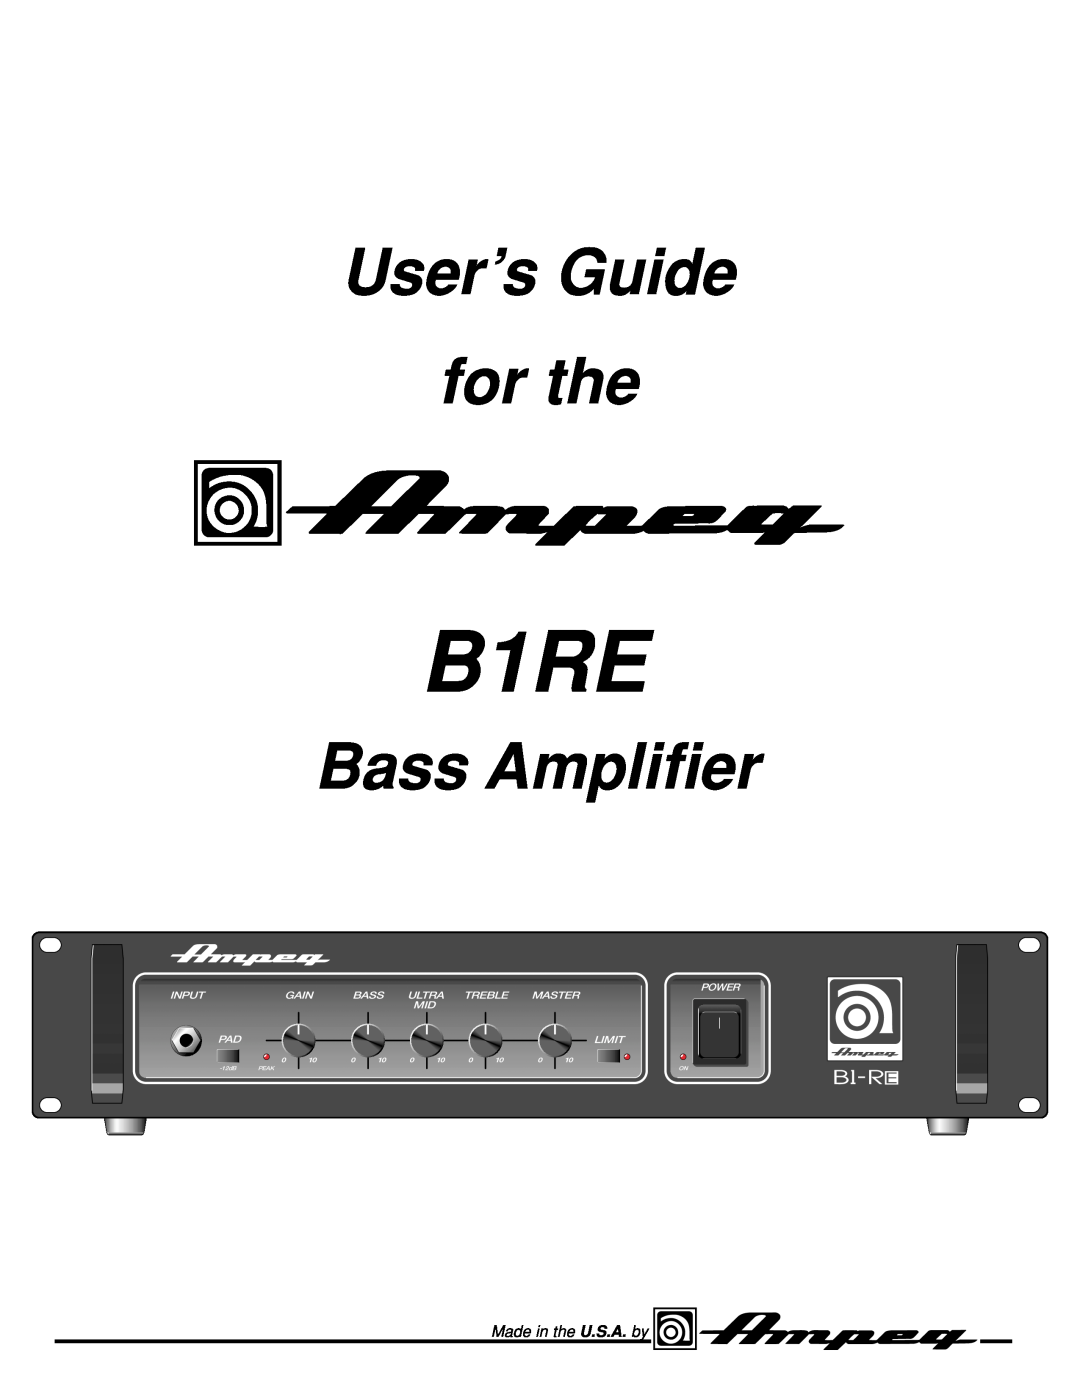 Ampeg B1RE manual User’s Guide for the, Bass Amplifier, Made in the U.S.A. by, Power, Input, Gain, Ultra Treble Master 